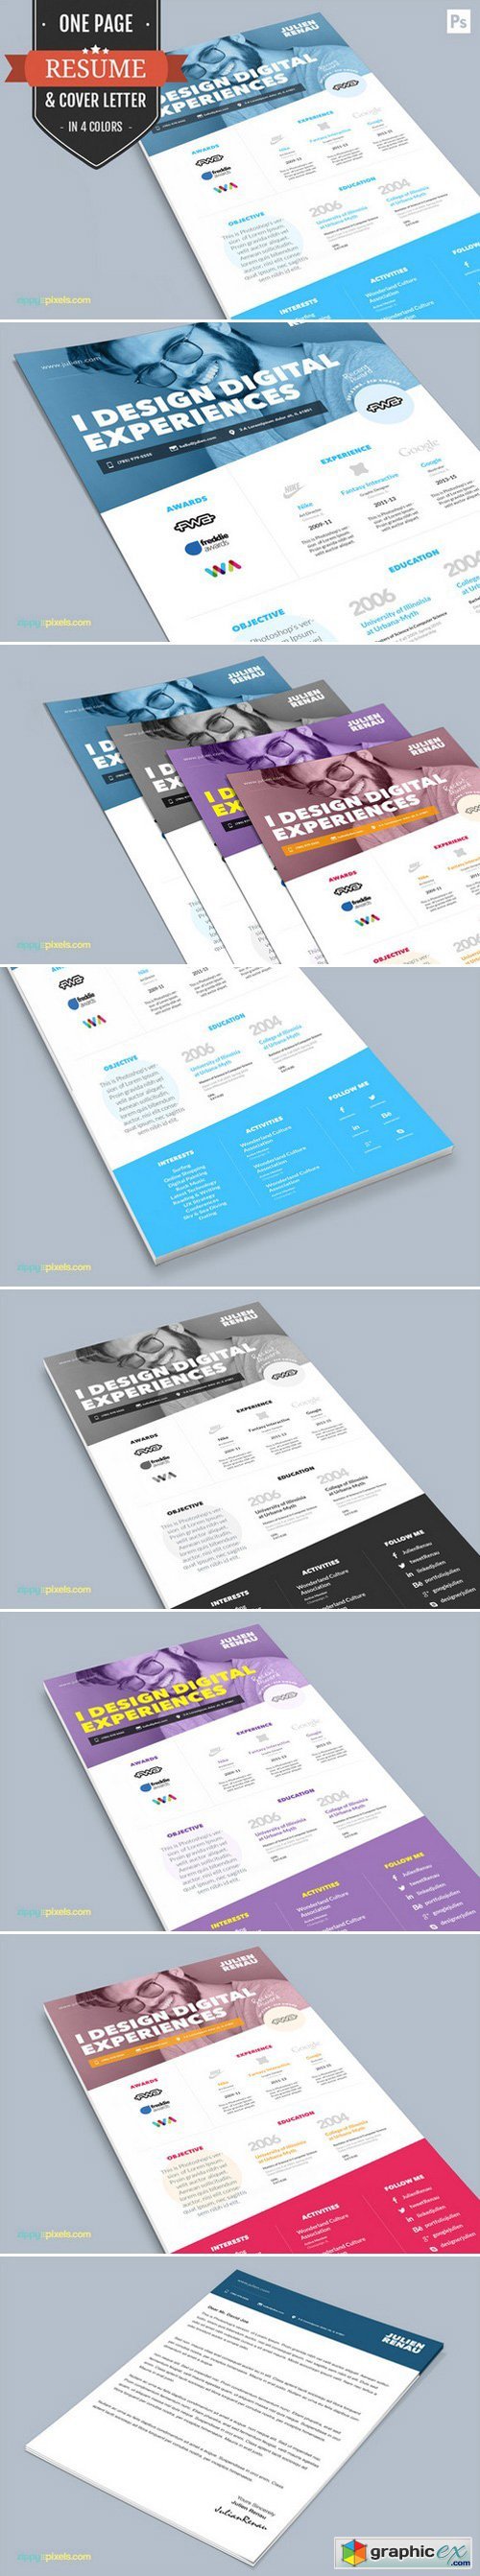 One Page Resume CV & Cover Letter